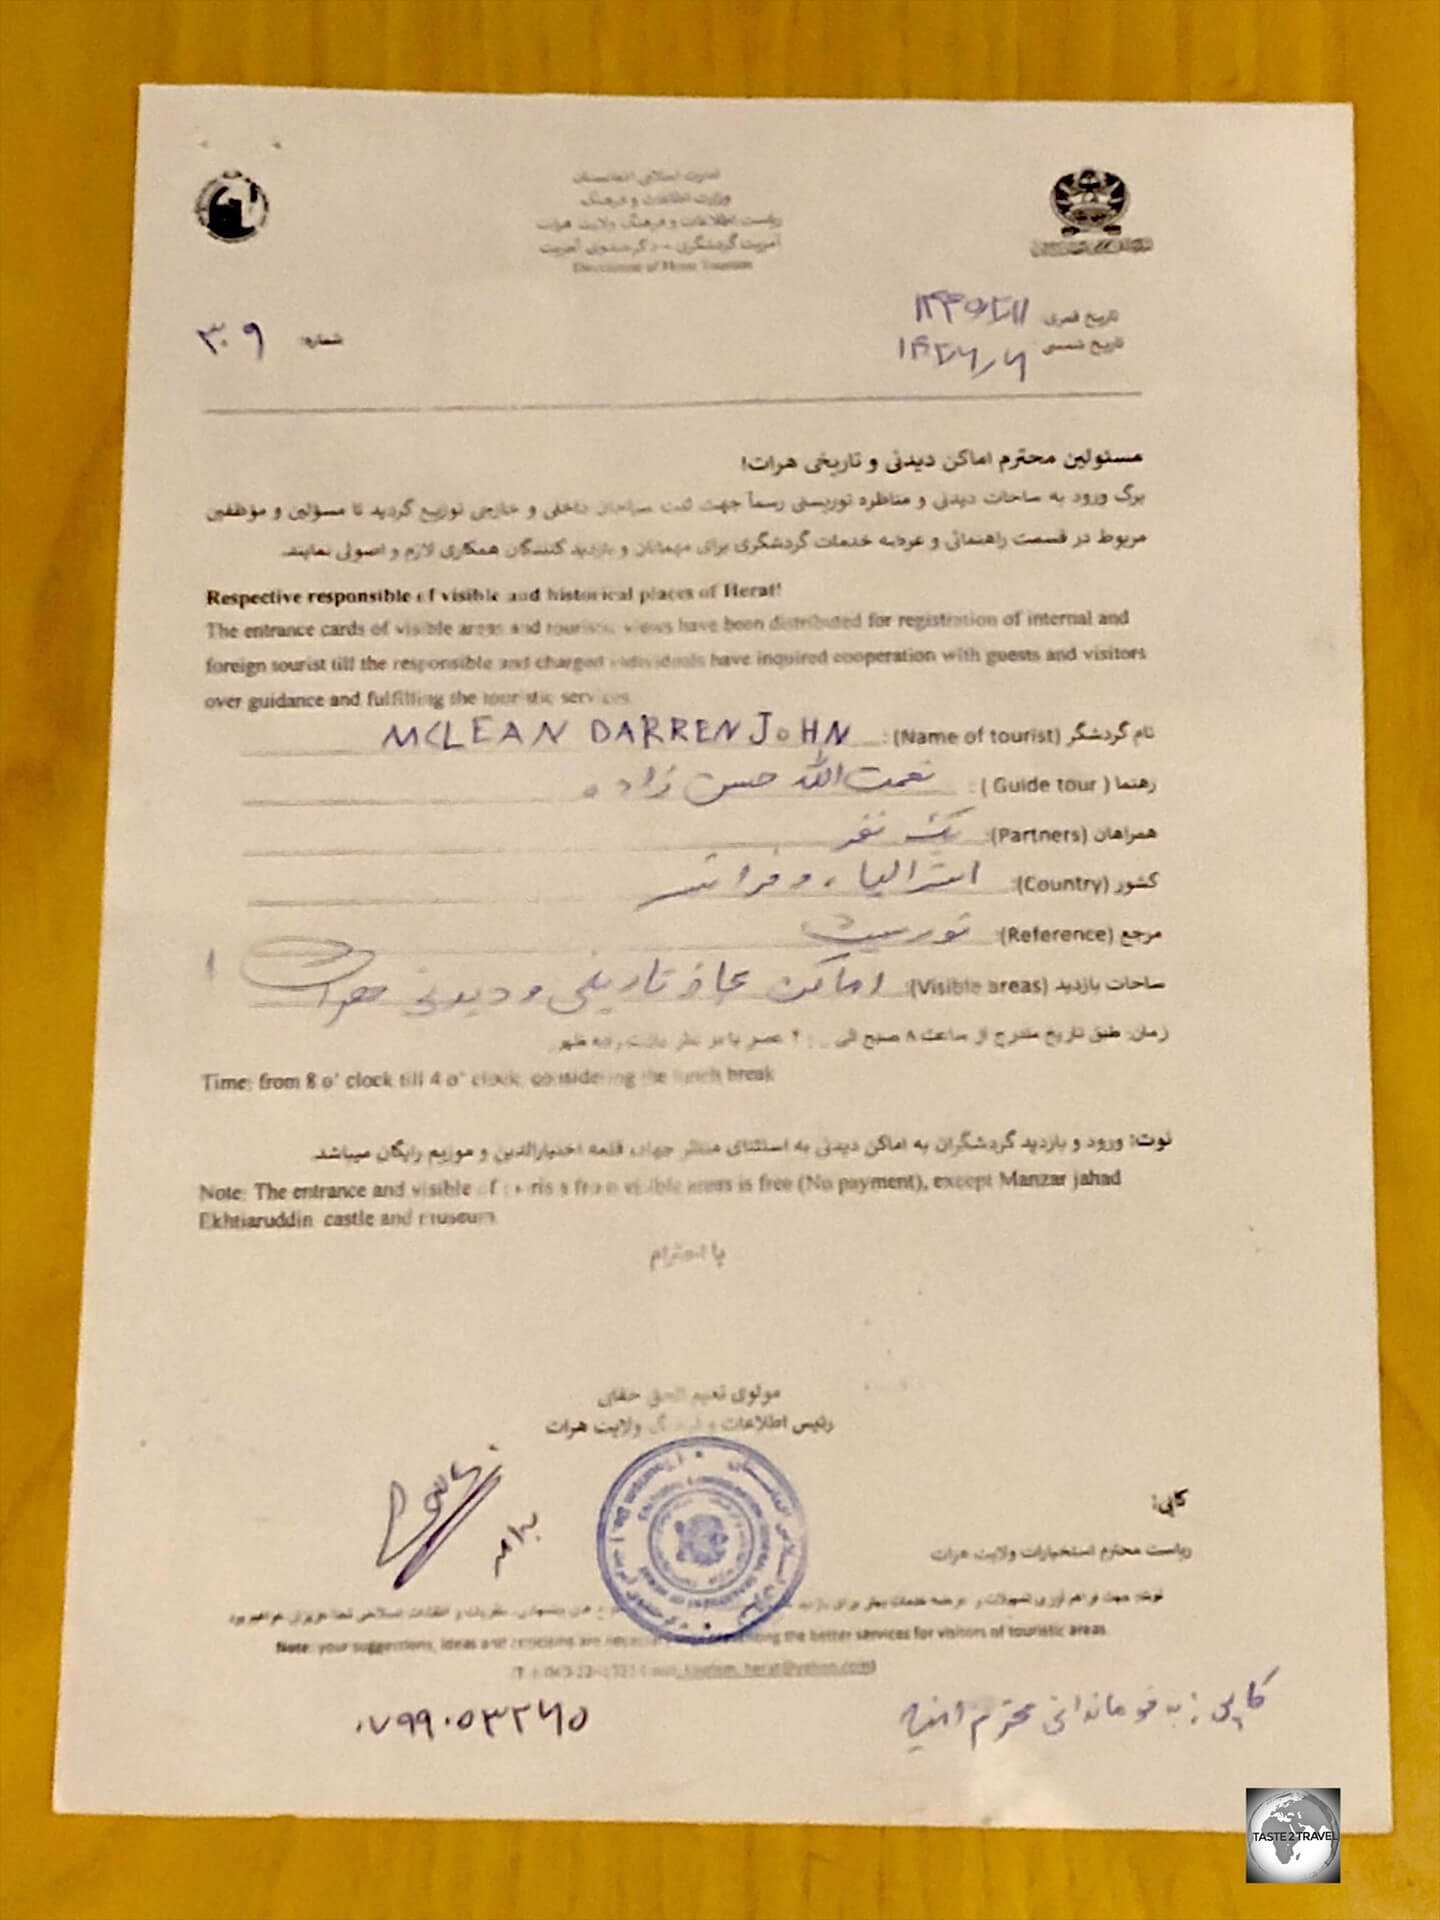 My travel authorisation document which was issued in Herat. 